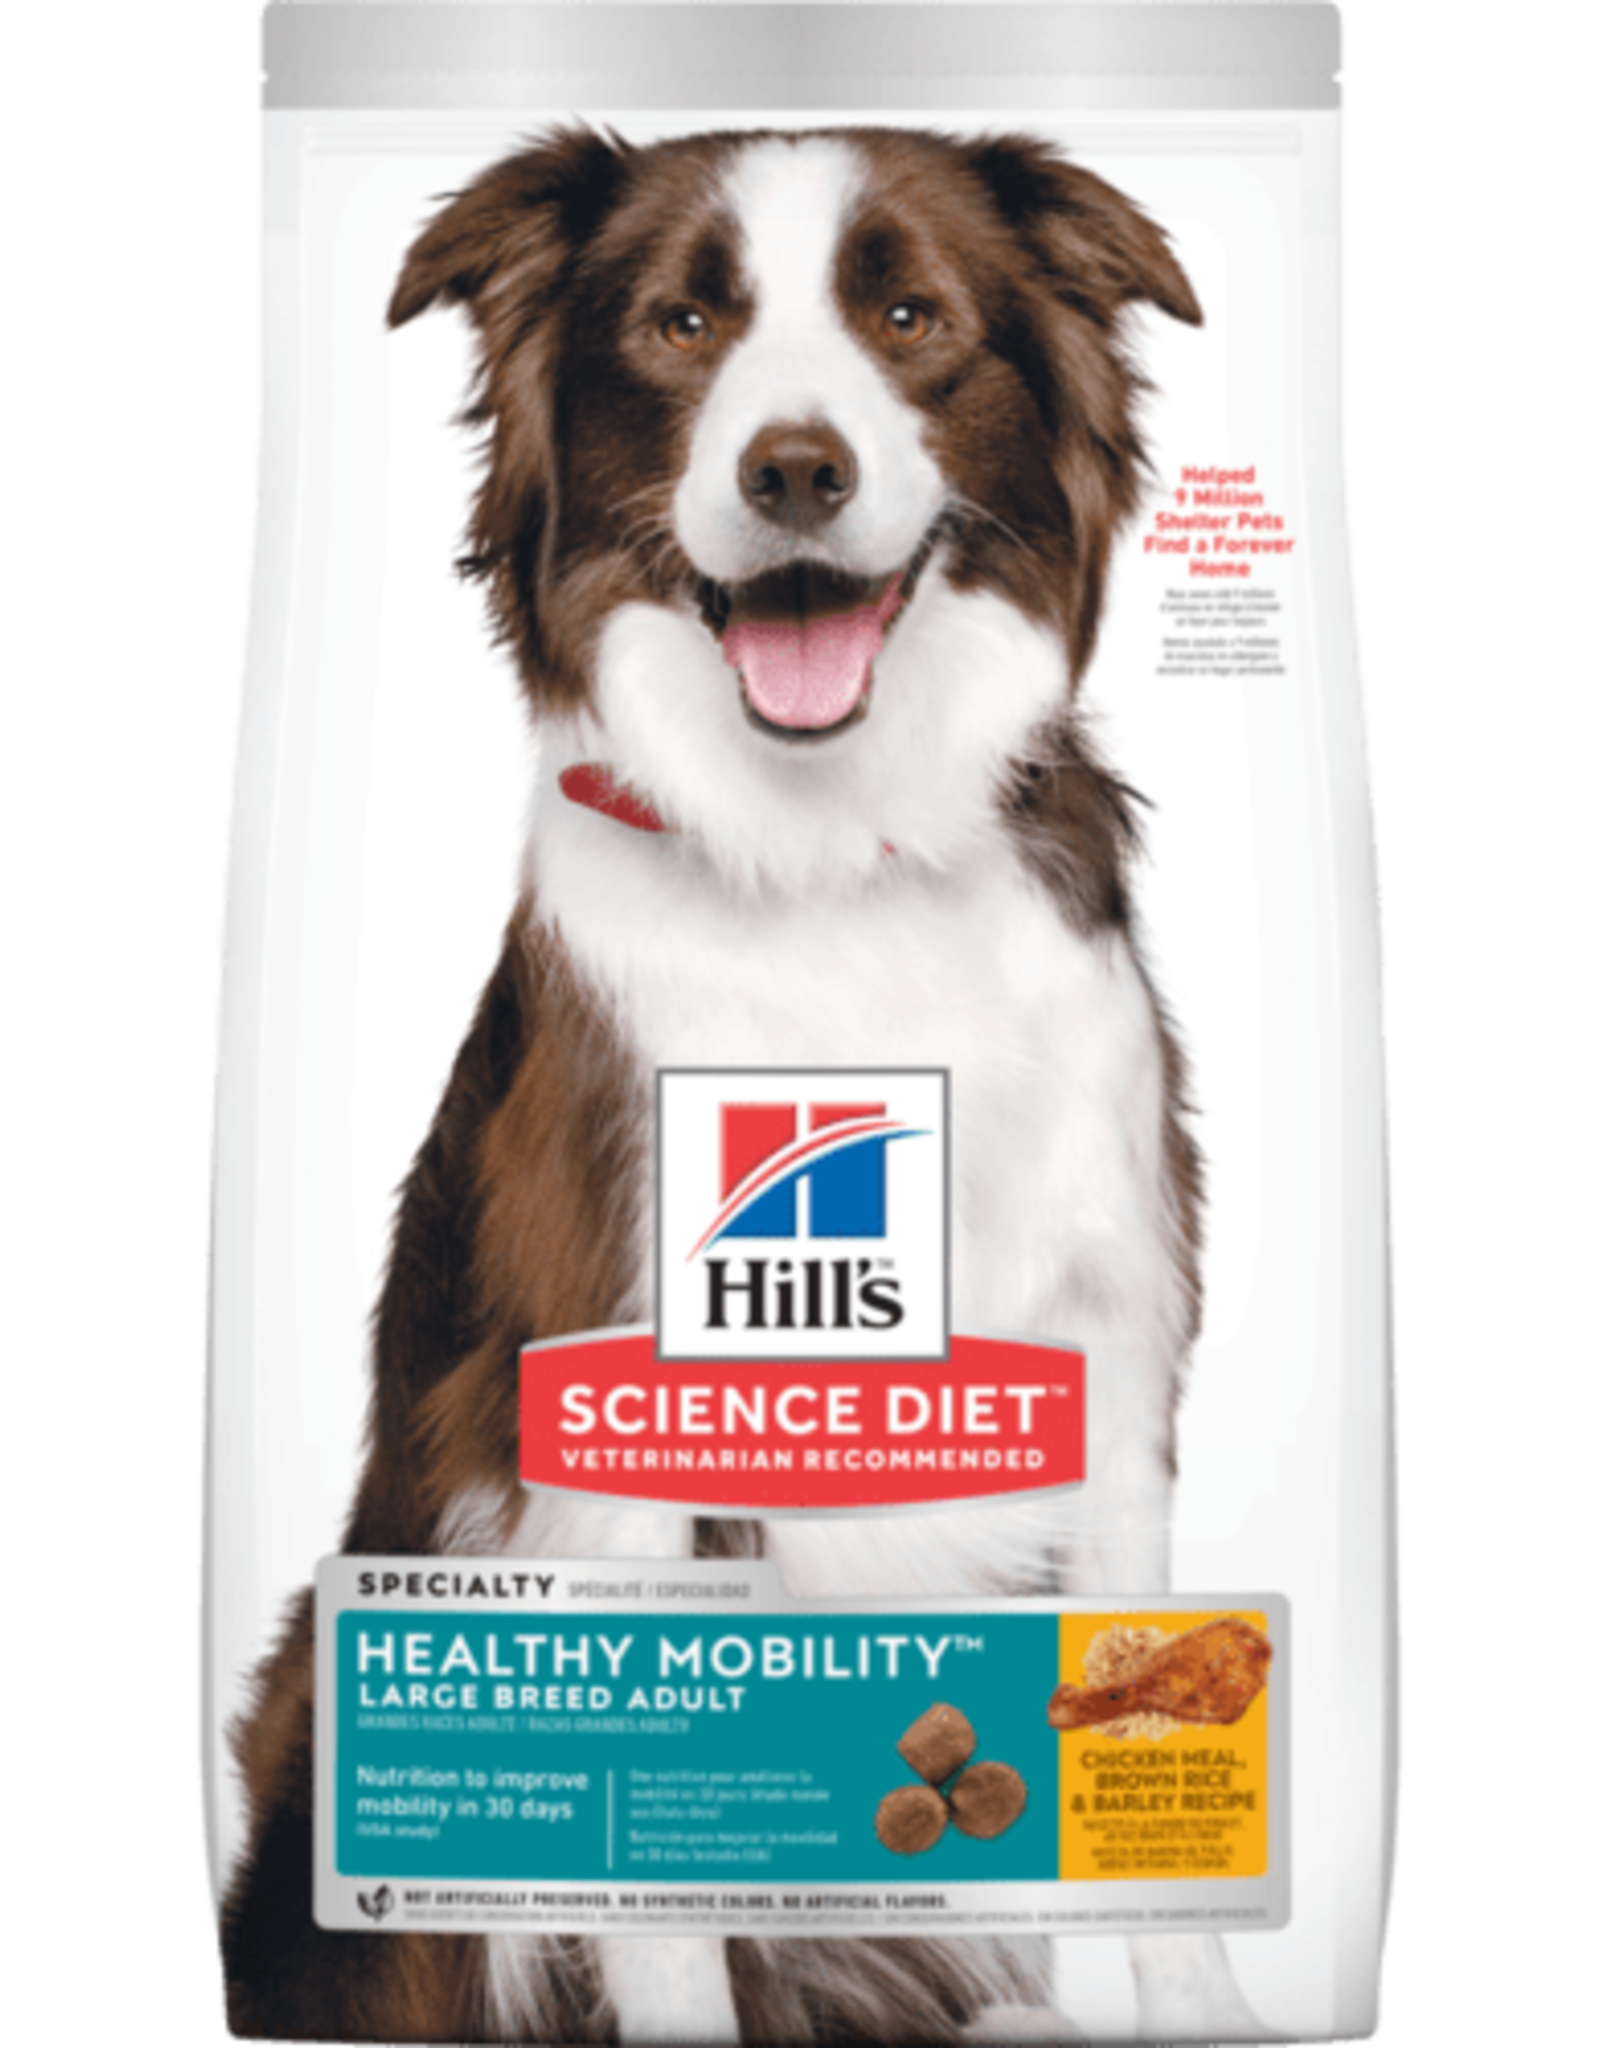 SCIENCE DIET HILL'S SCIENCE DIET CANINE ADULT HEALTHY MOBILITY LARGE BREED 30LBS